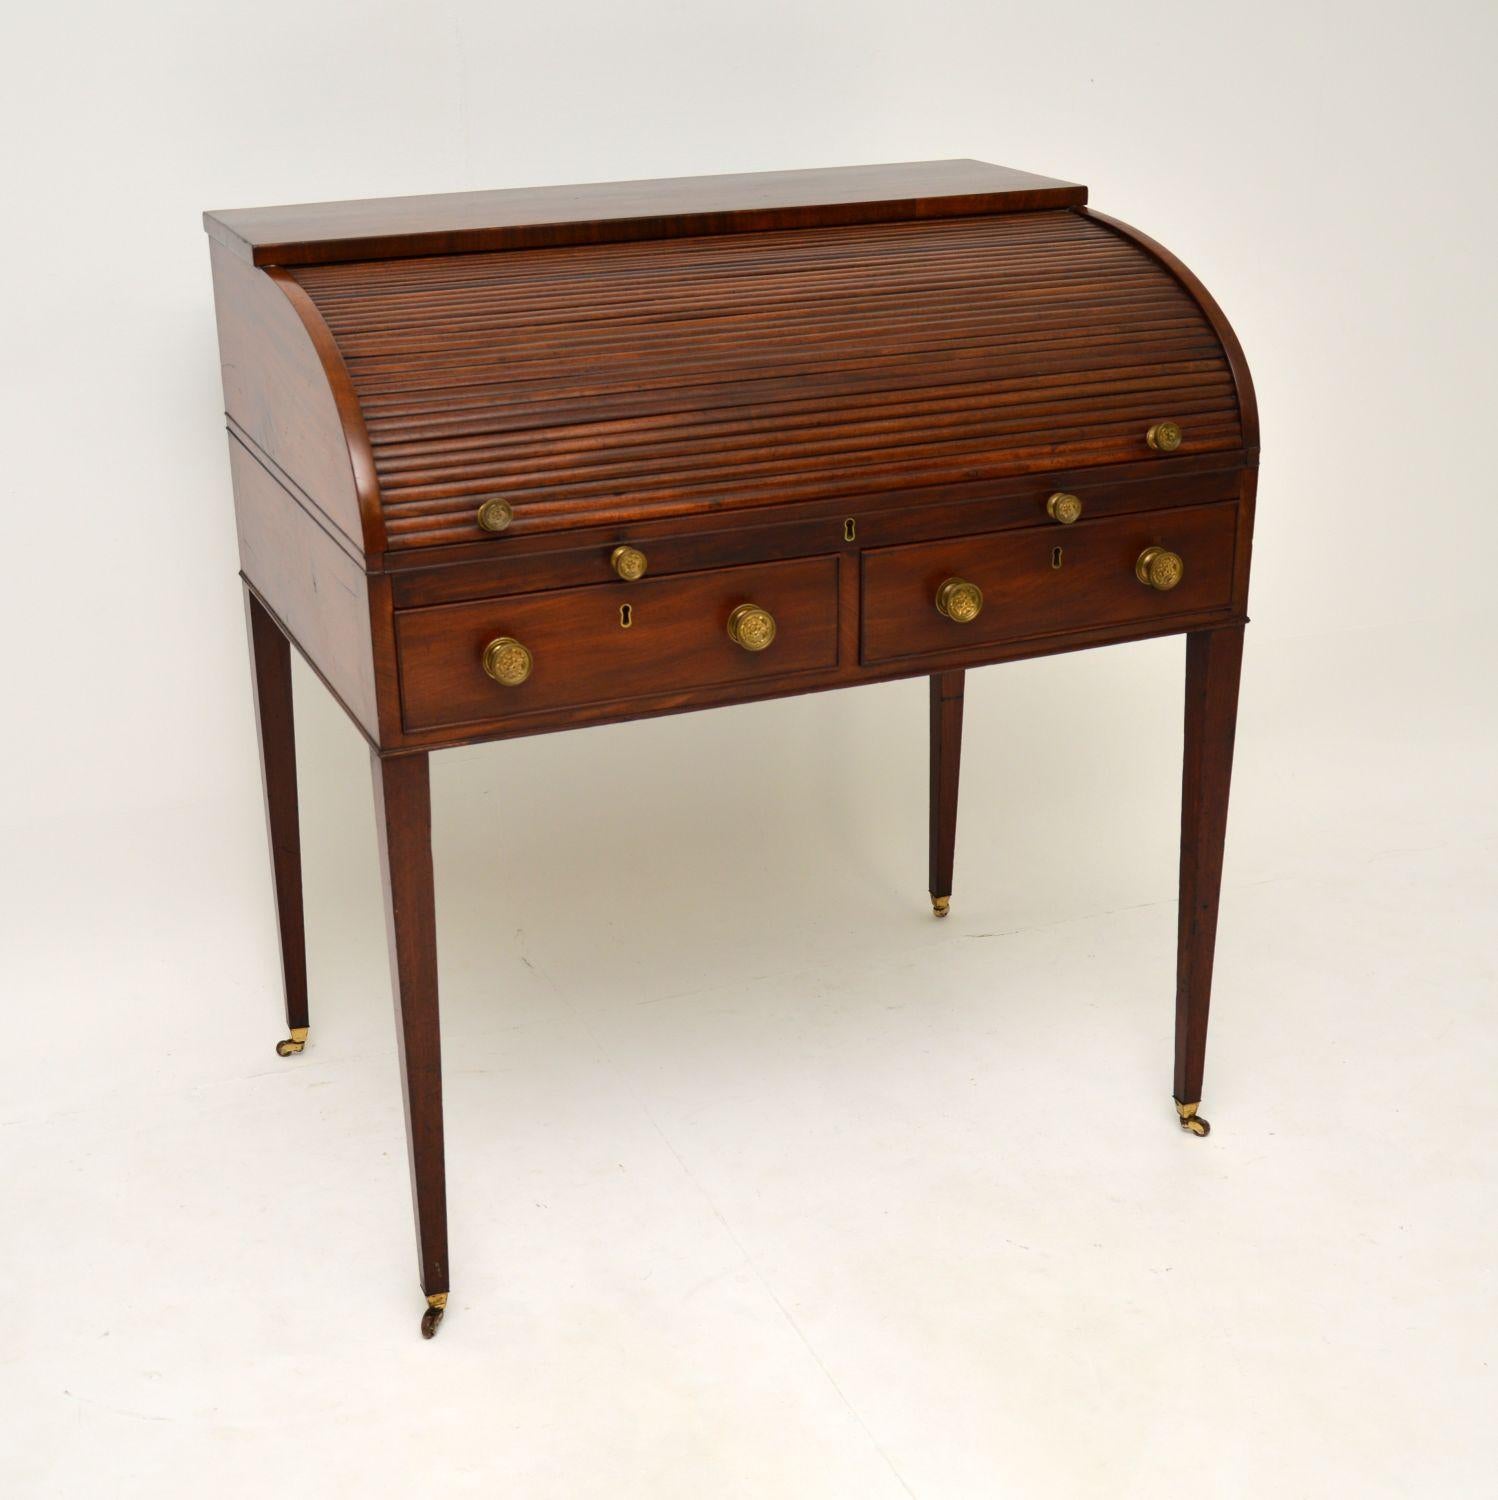 A stunning antique George III period roll top writing desk in solid wood. This was made in England & I would date it to around the 1790’s period.

This is of extremely fine quality and is a very useful item. The tambour top rolls back to reveal a